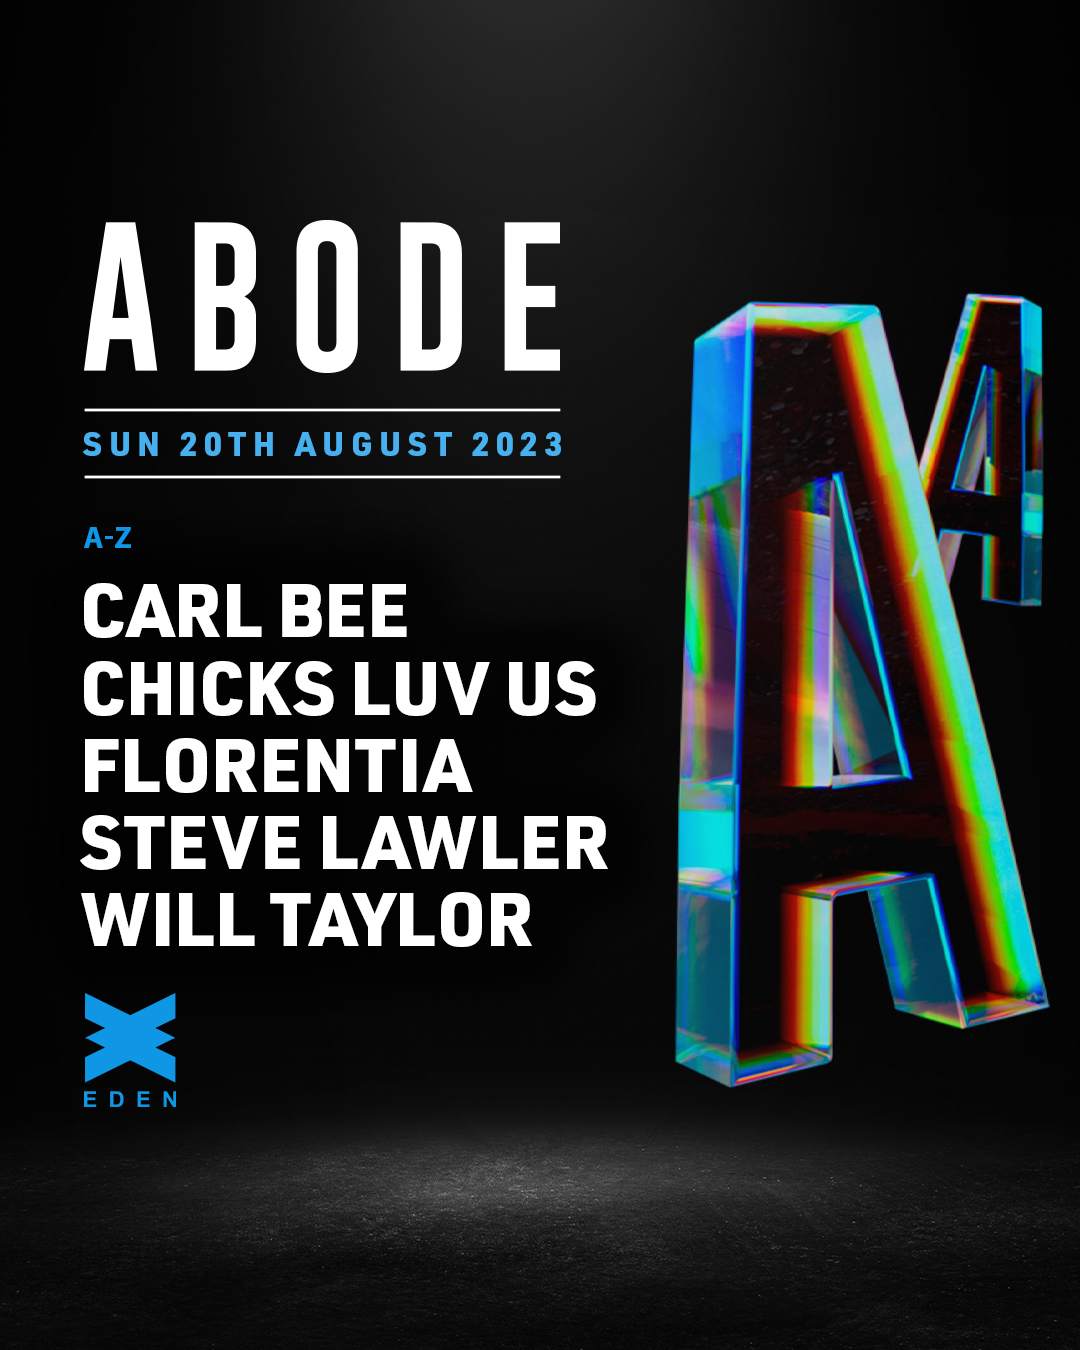 ABODE Ibiza Sundays: 20th August with Steve Lawler, Chicks Luv Us, FLORENTIA - フライヤー表